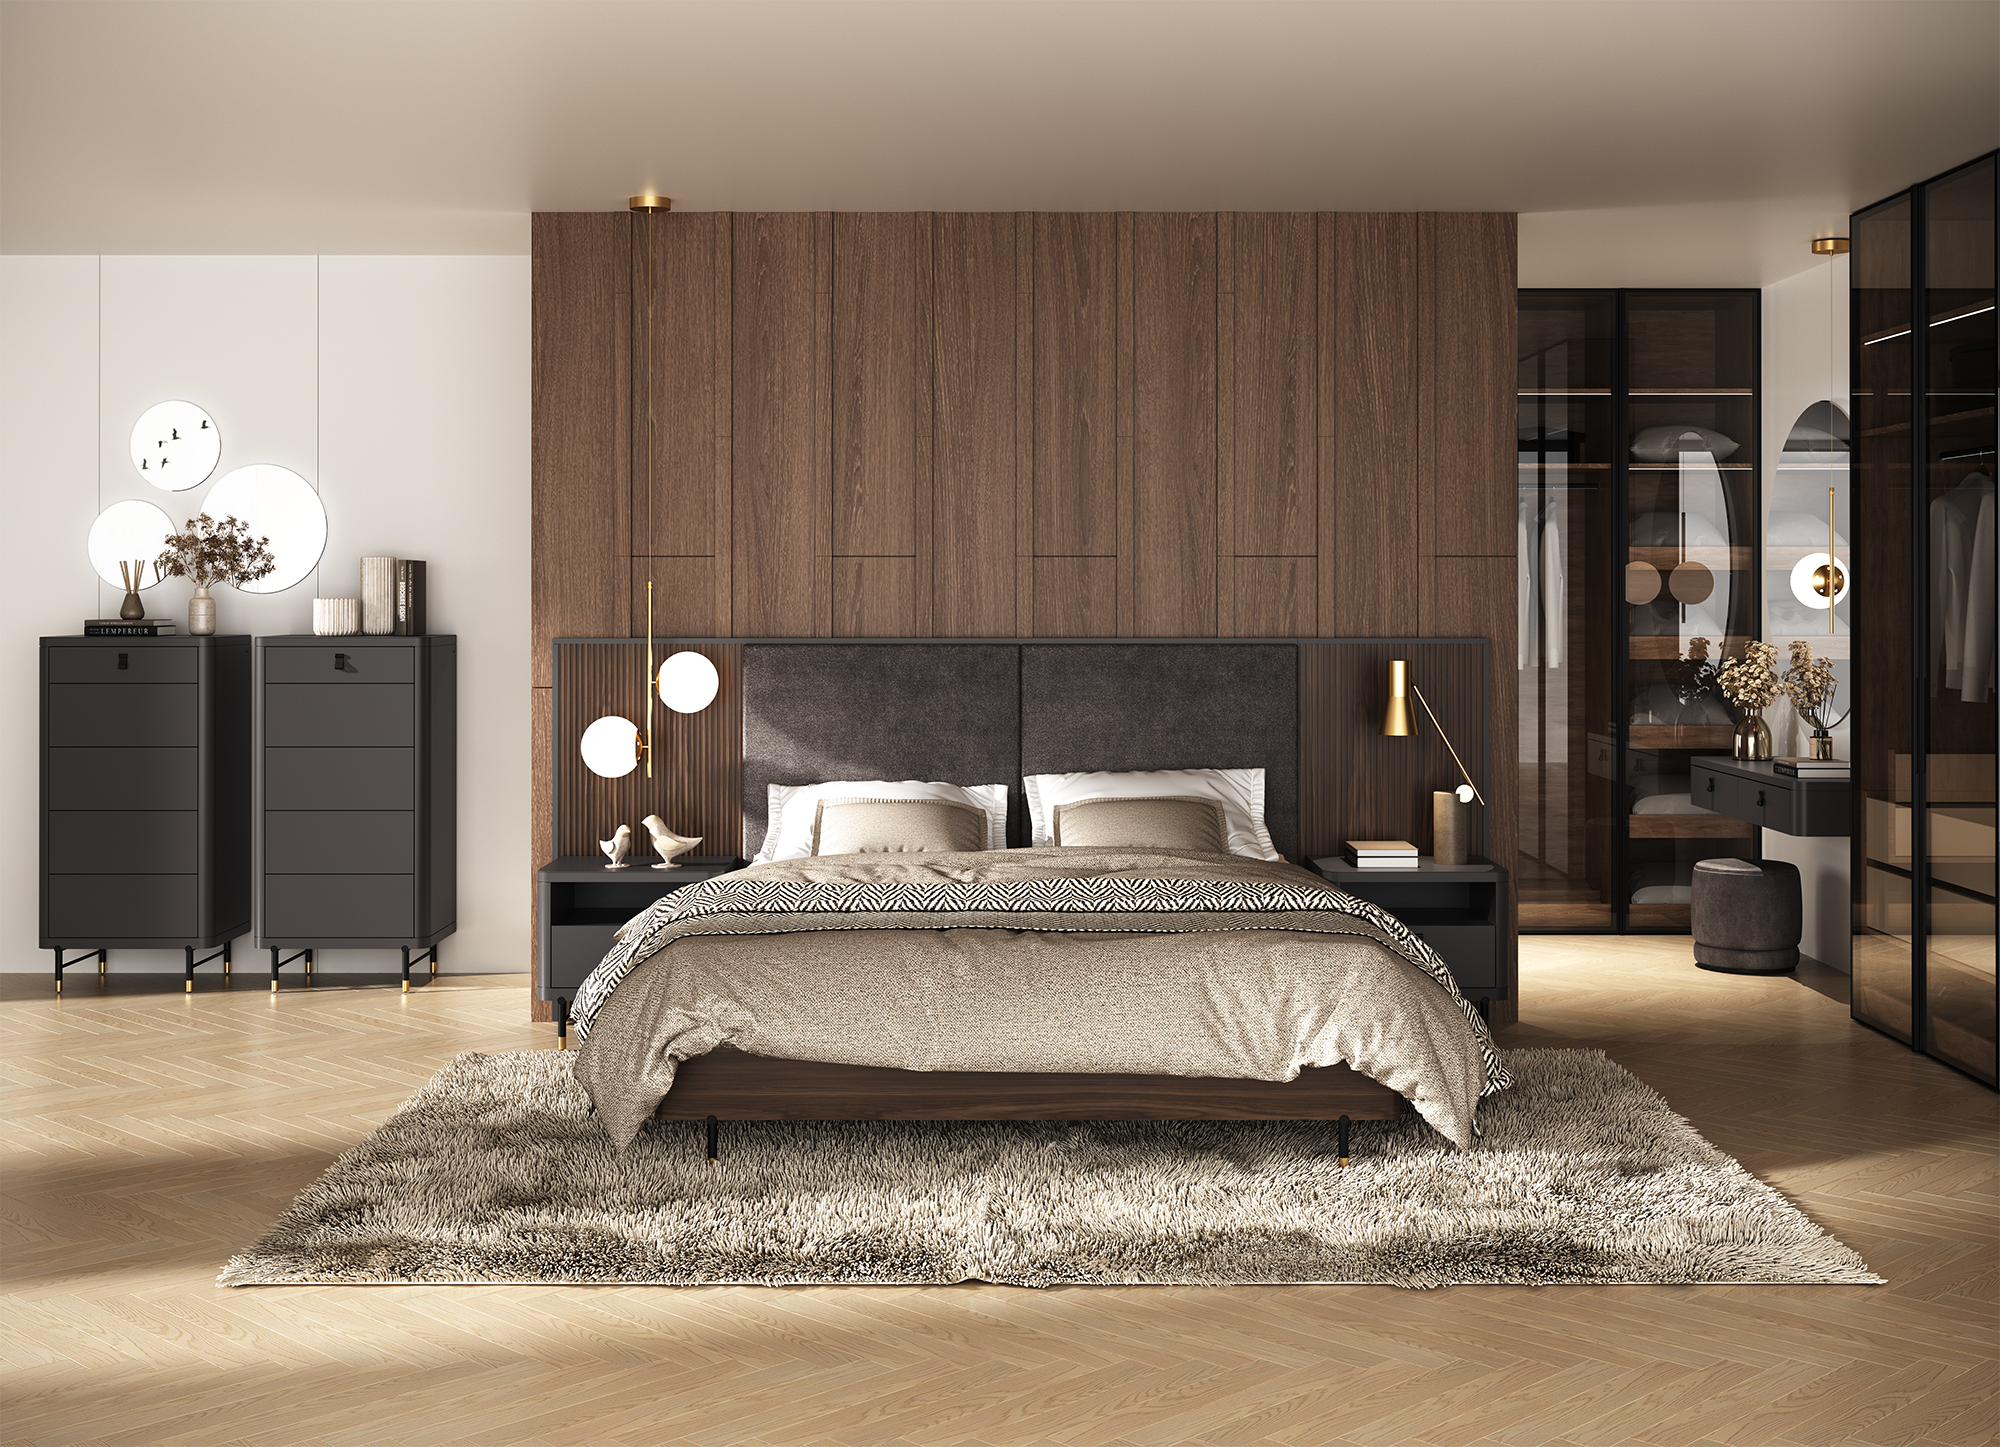 A photo of a modern bedroom, with a bed, dressers, wall shelving and nightstands, in a clean, sunlit room with walnut accents on the wall and midcentury modern globe lamps by the bedside.